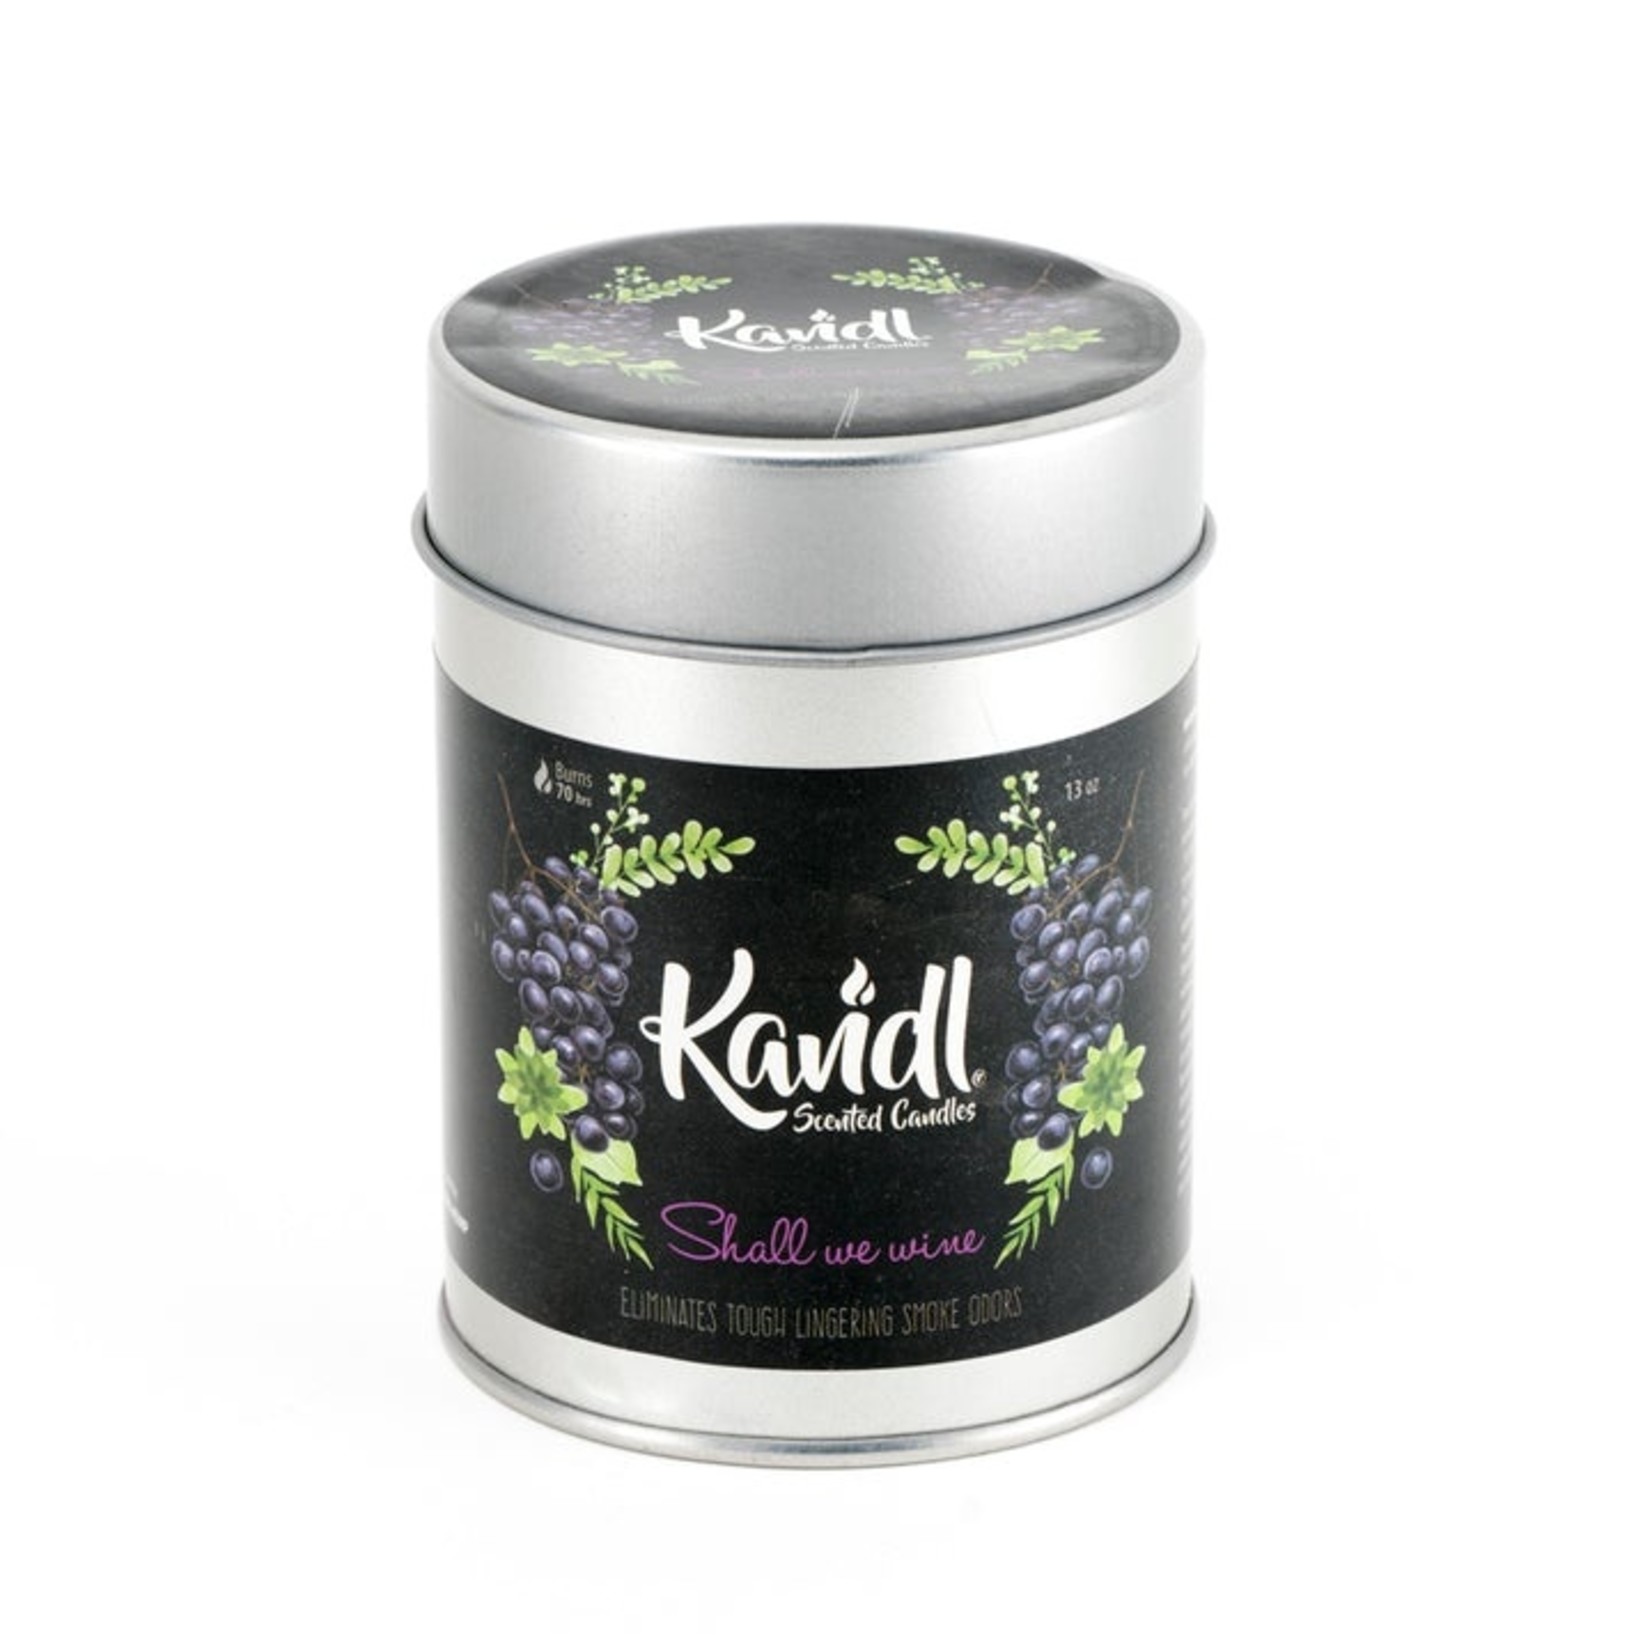 KANDL SCENTED CANDLES SHALL WE WINE